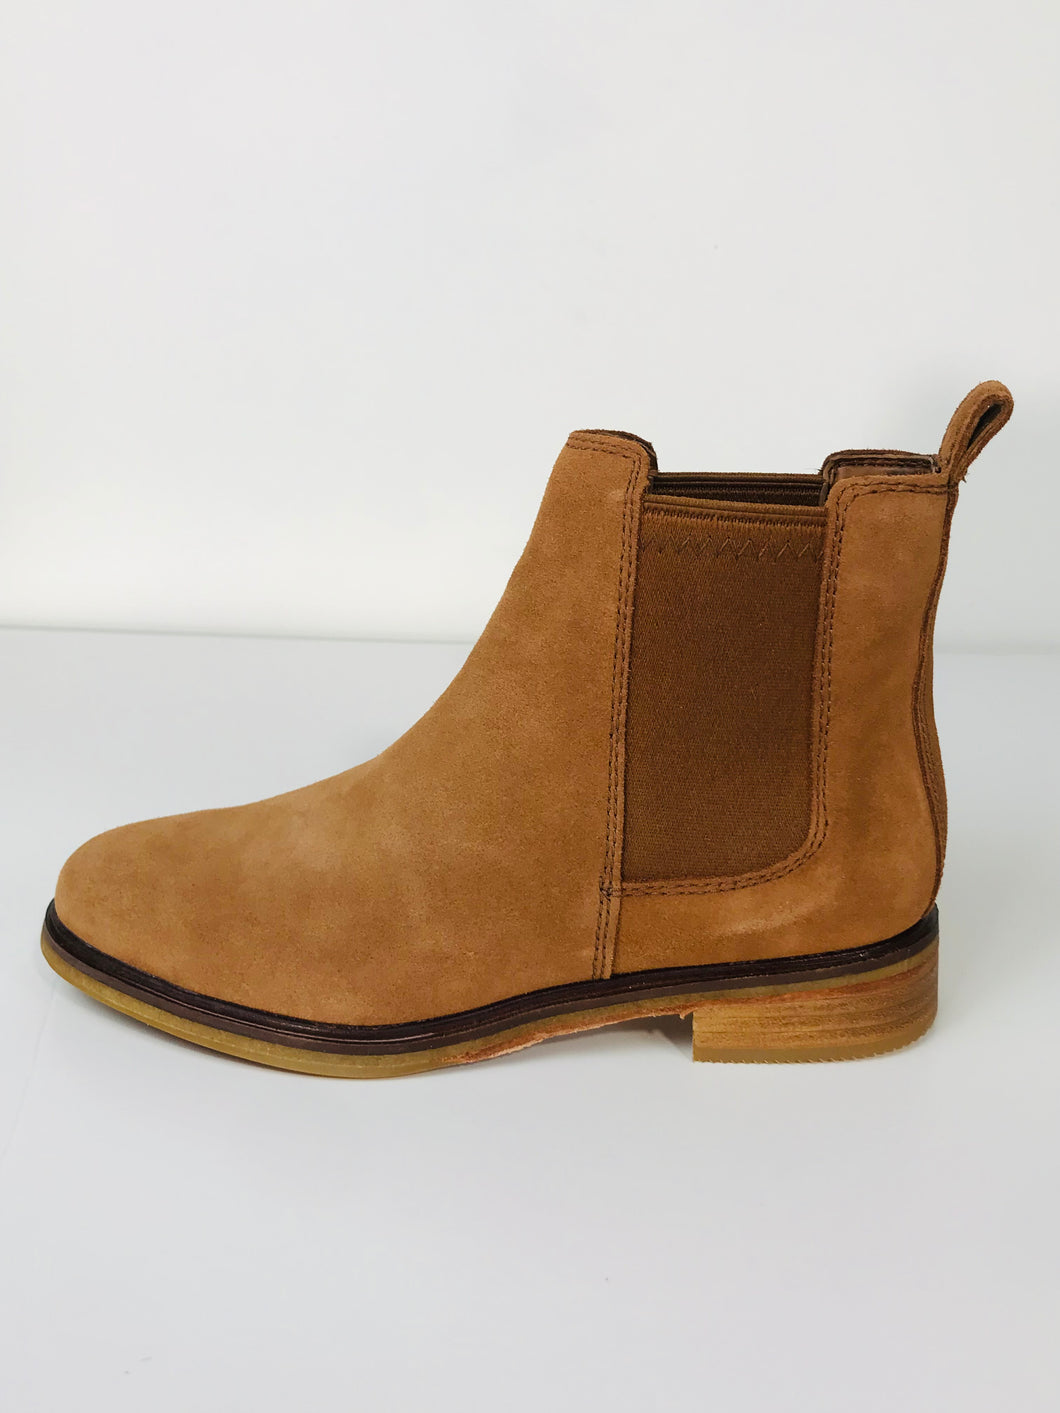 Clanks Women's Suede Ankle Boots Boots NWT | US7.5 UK5  | Brown